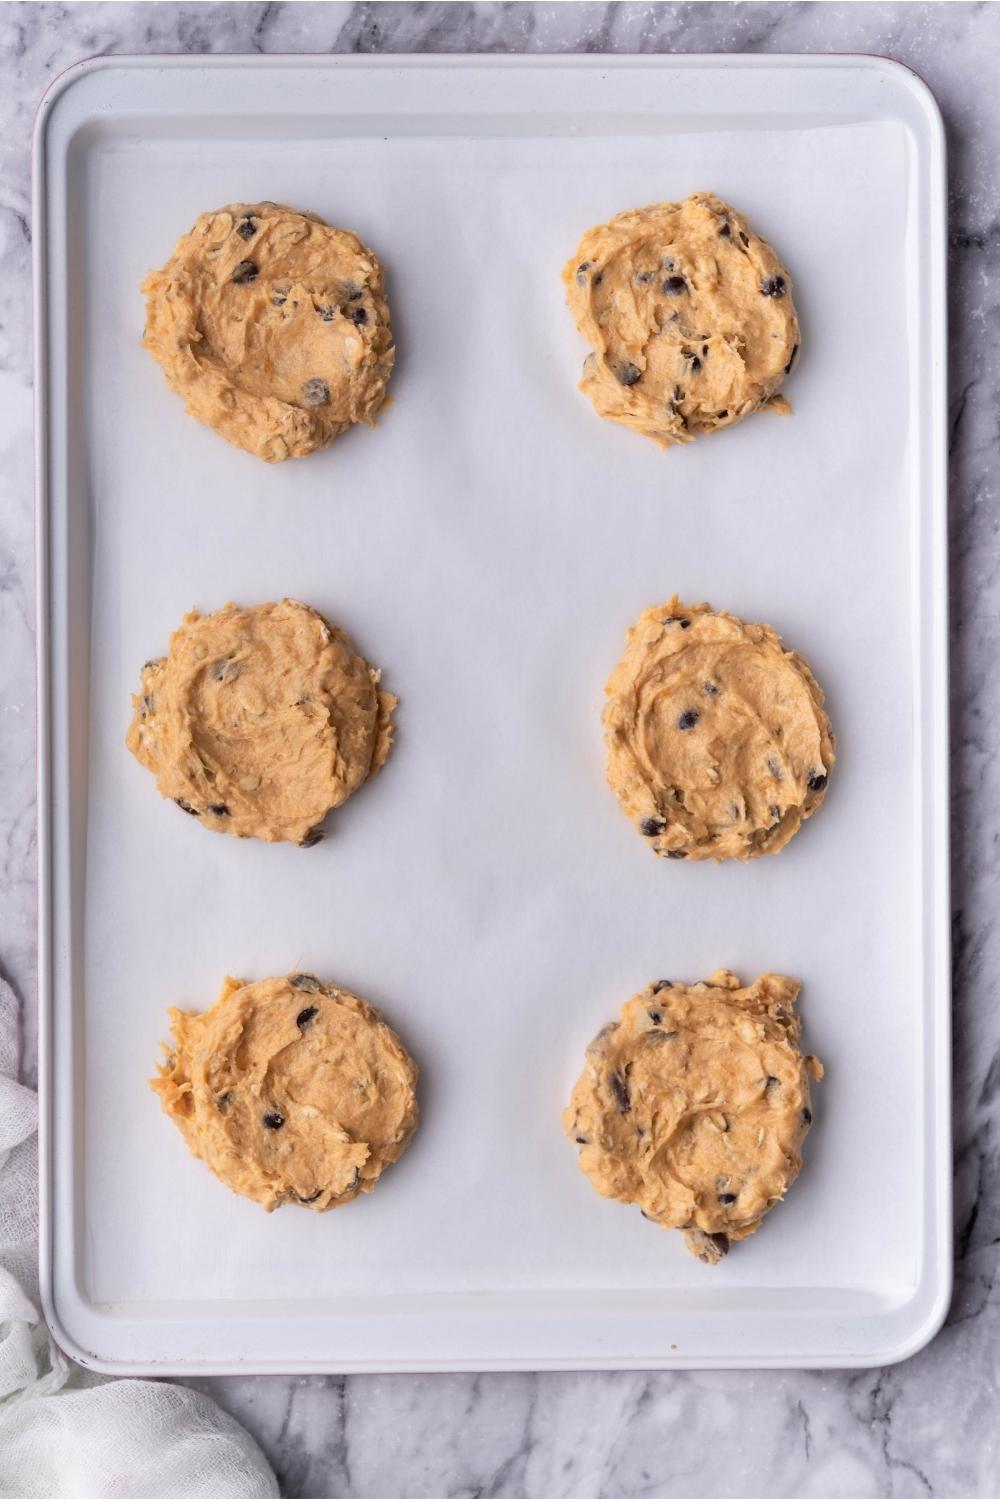 Unbaked sweet potato cookies portioned on a baking sheet lined with parchment paper.